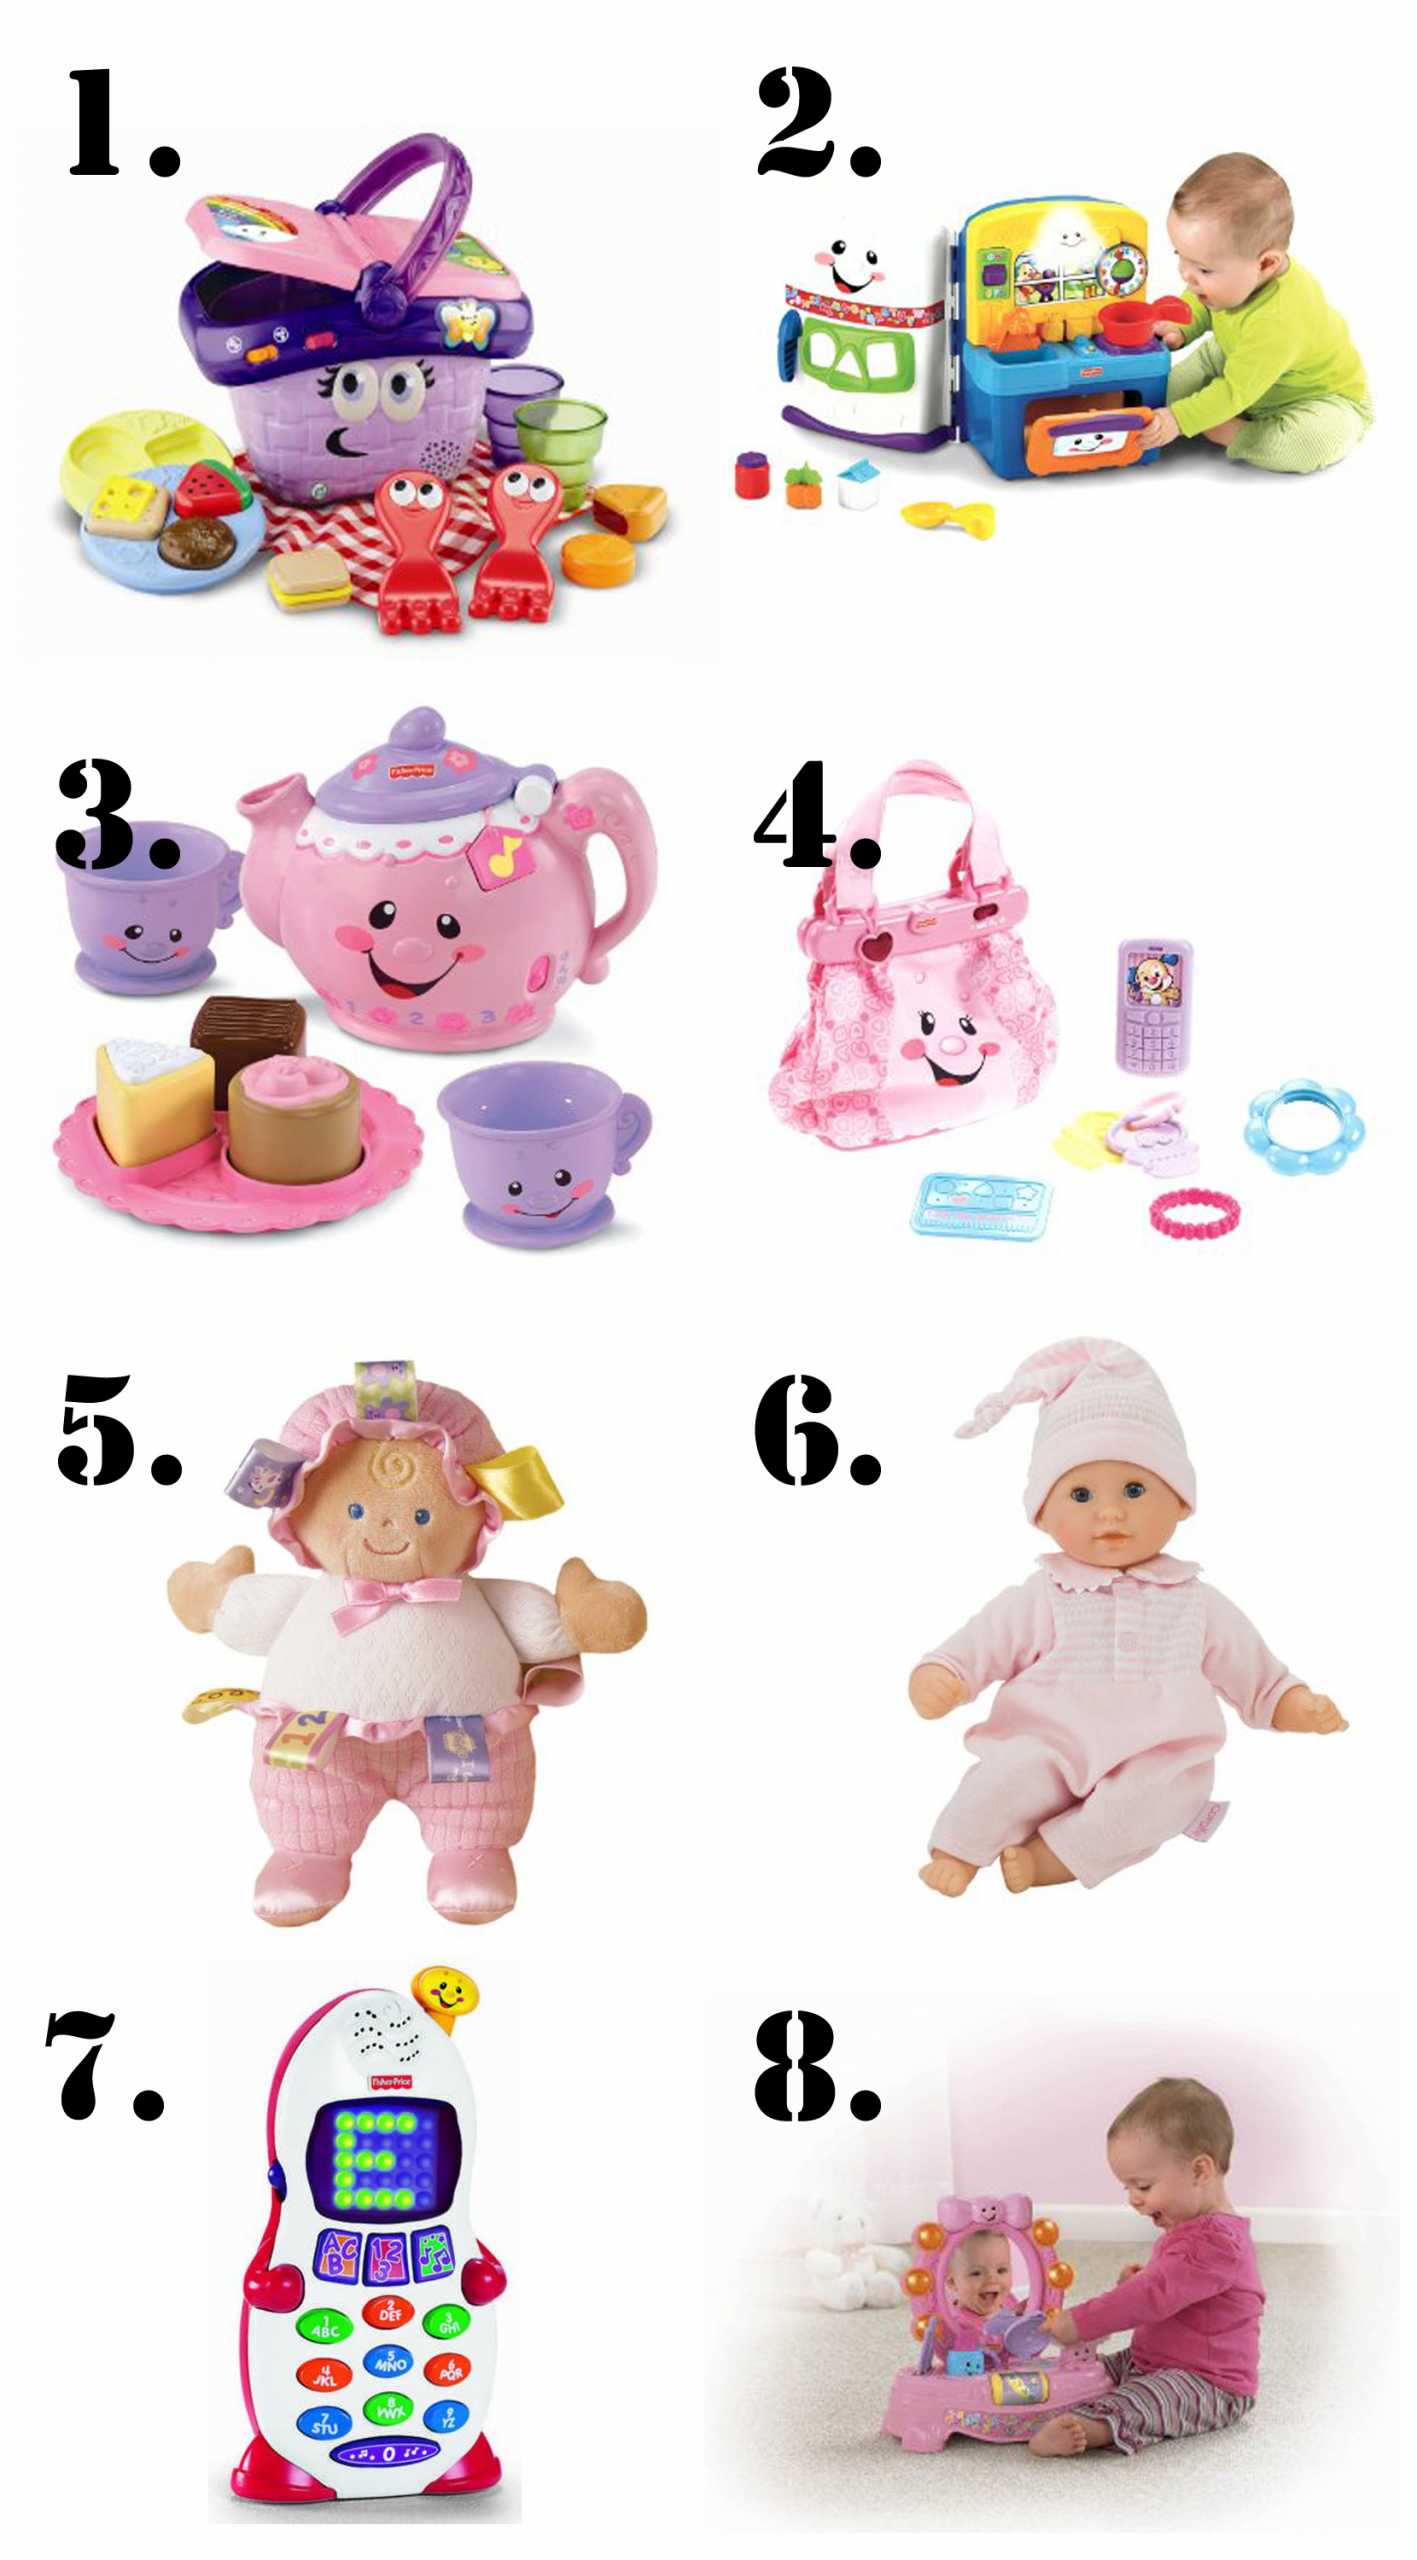 Baby Girl One Year Old Gift Ideas
 best birthday presents for a 1 year old